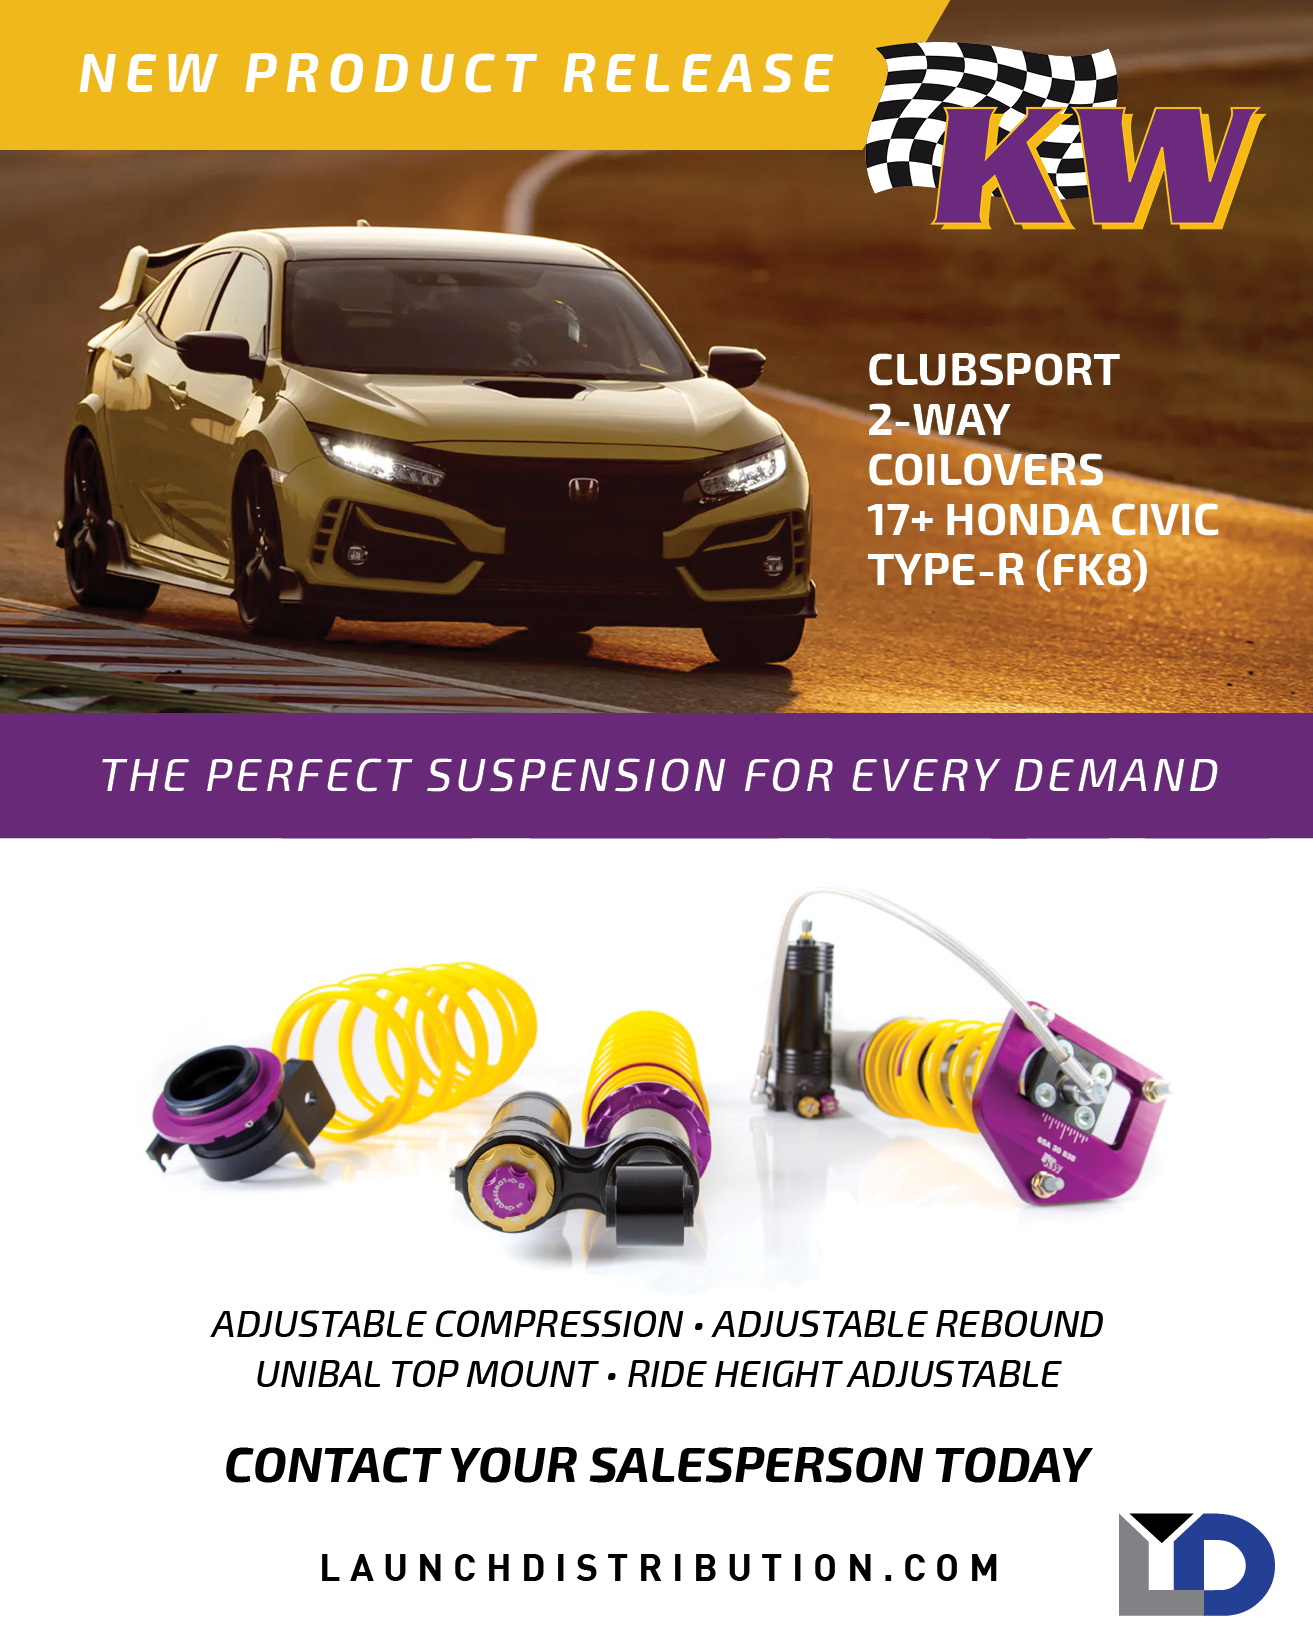 KW Clubsport 2 way coilovers for the FK8 Honda Civic Type-R